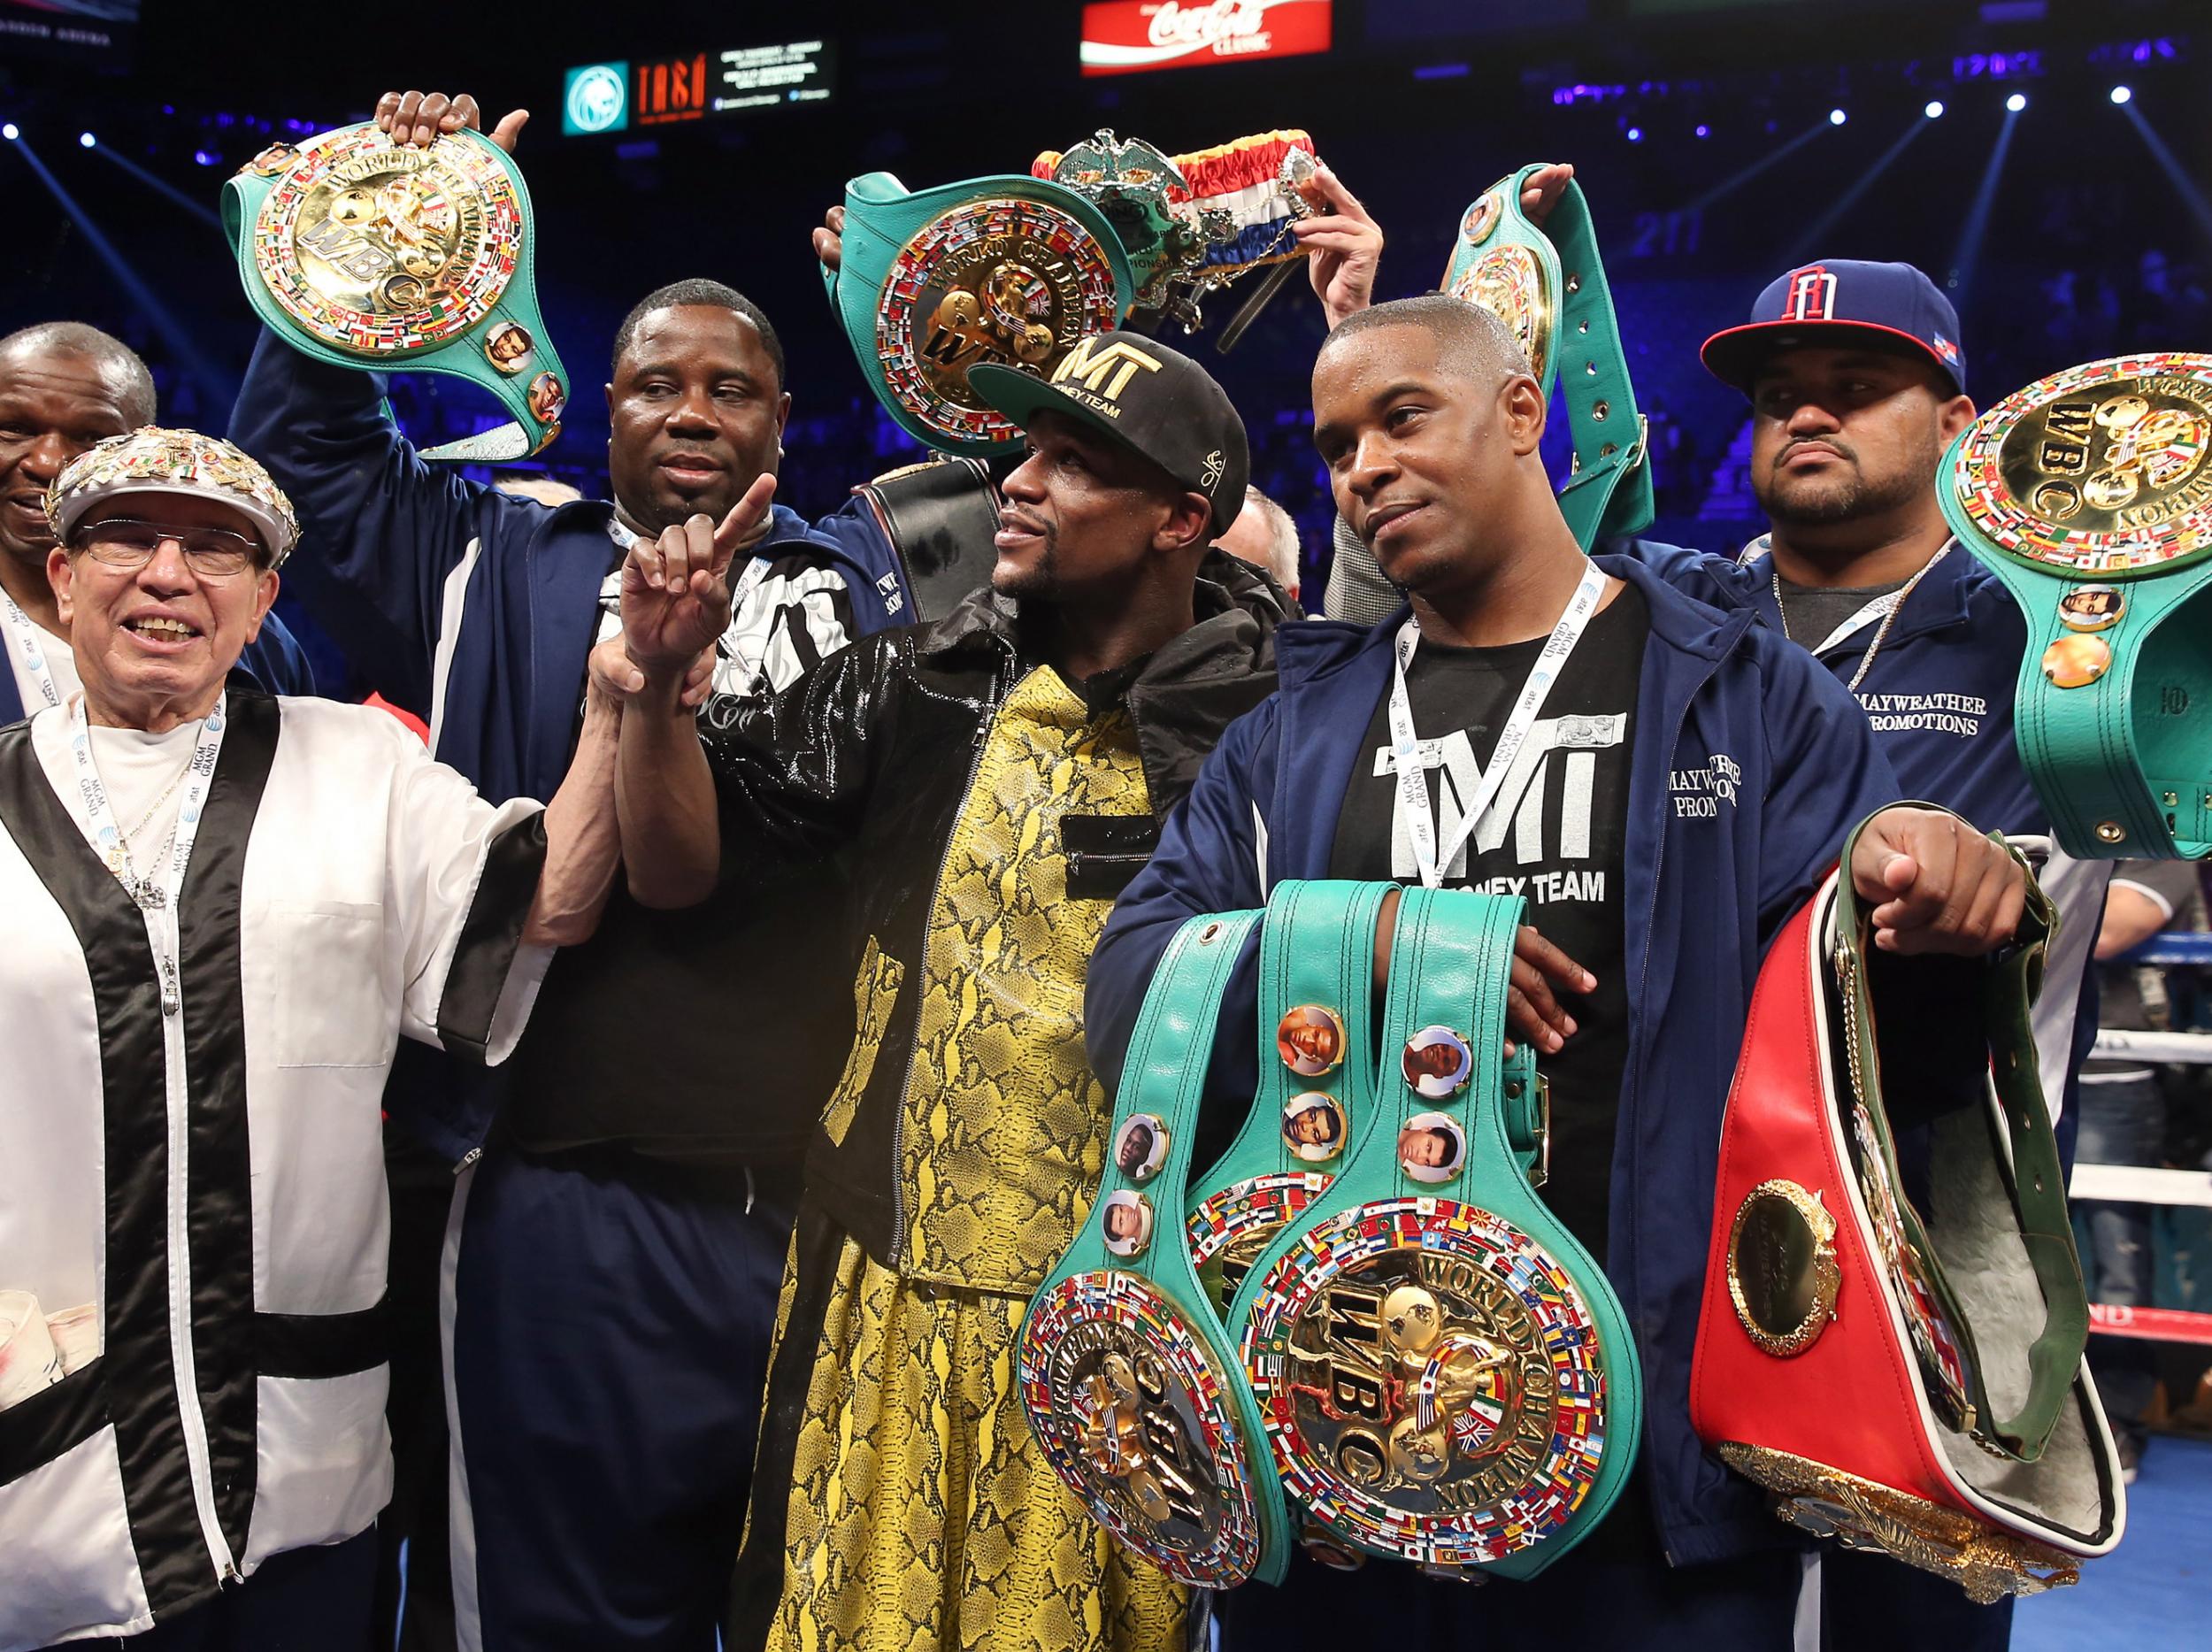 Mayweather has won a number of titles